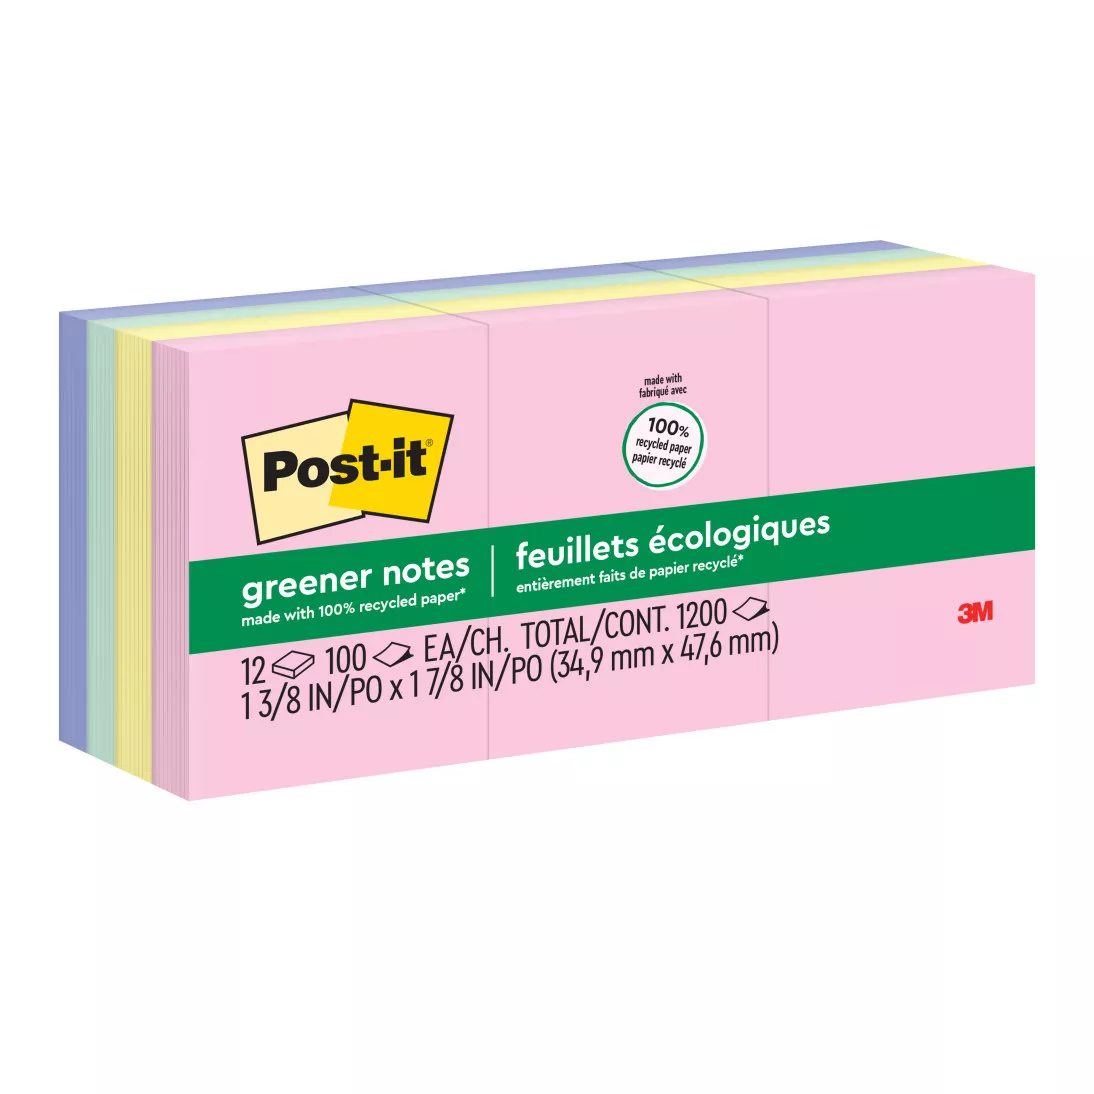 Post-it® Greener Notes 653-RP-A, 1-3/8 in x 1-7/8 in (34,9 mm x 47,6 mm)
Helsinki Colors